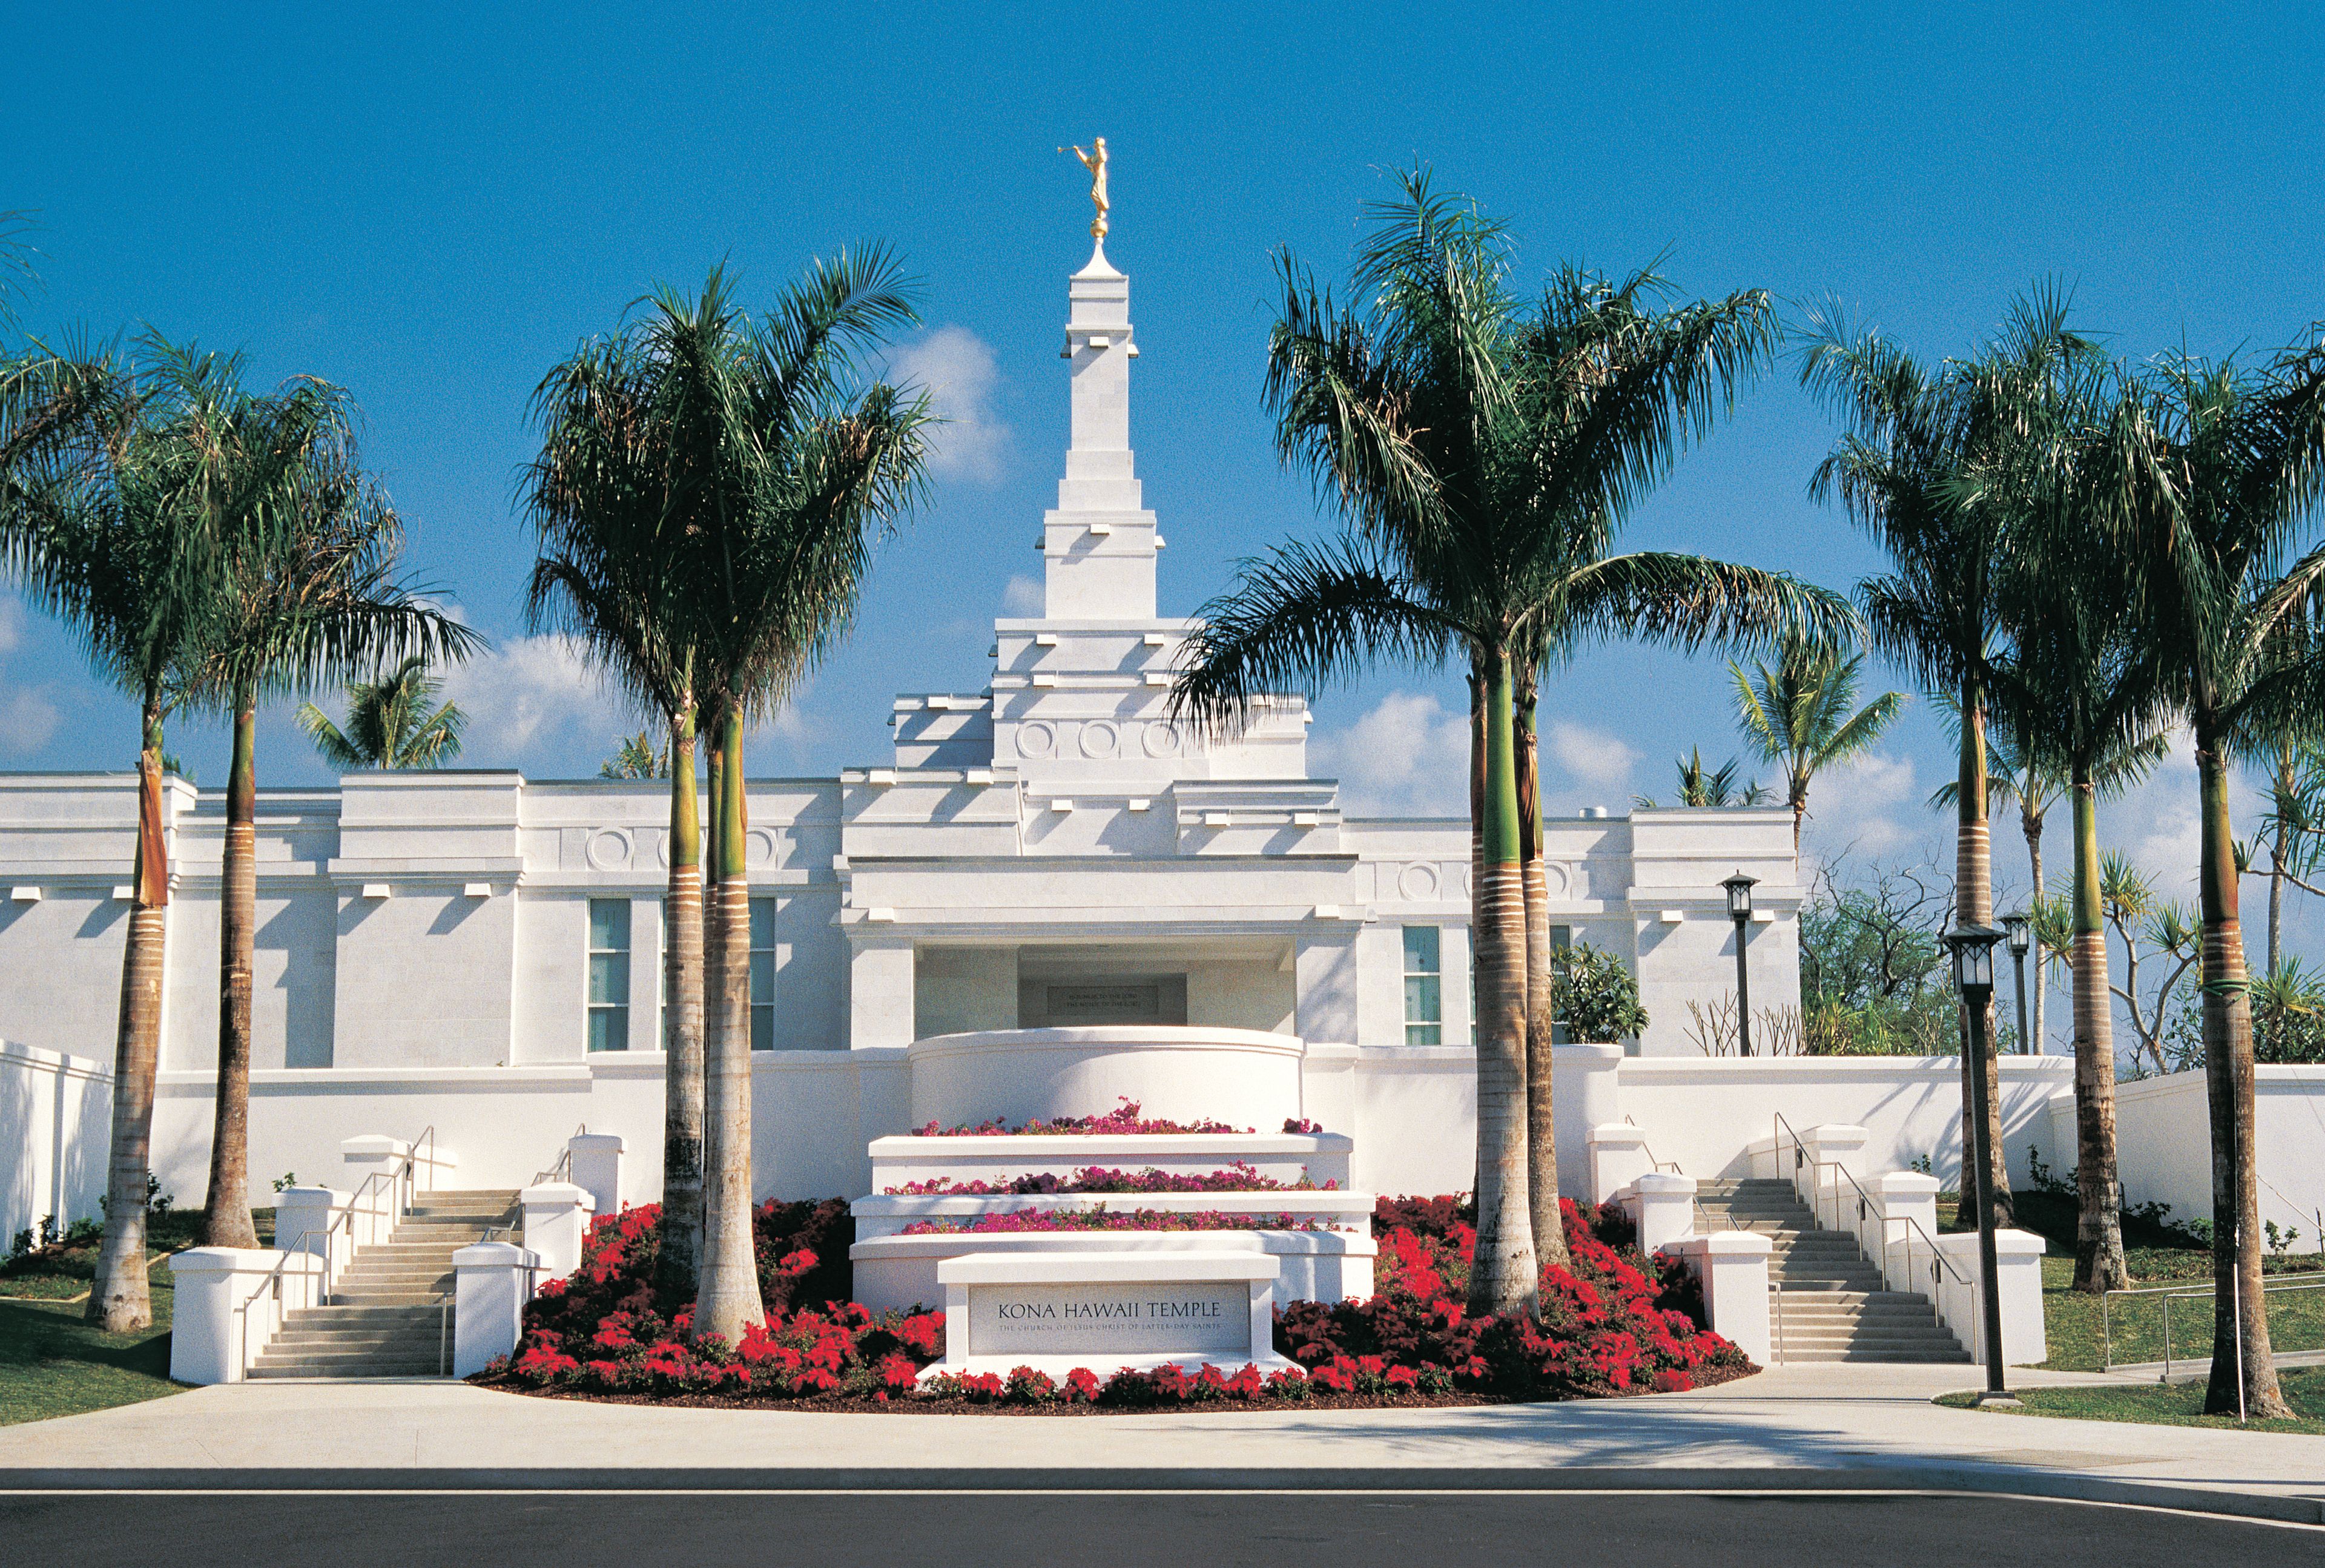 The front entrance of the Kona Hawaii Temple.